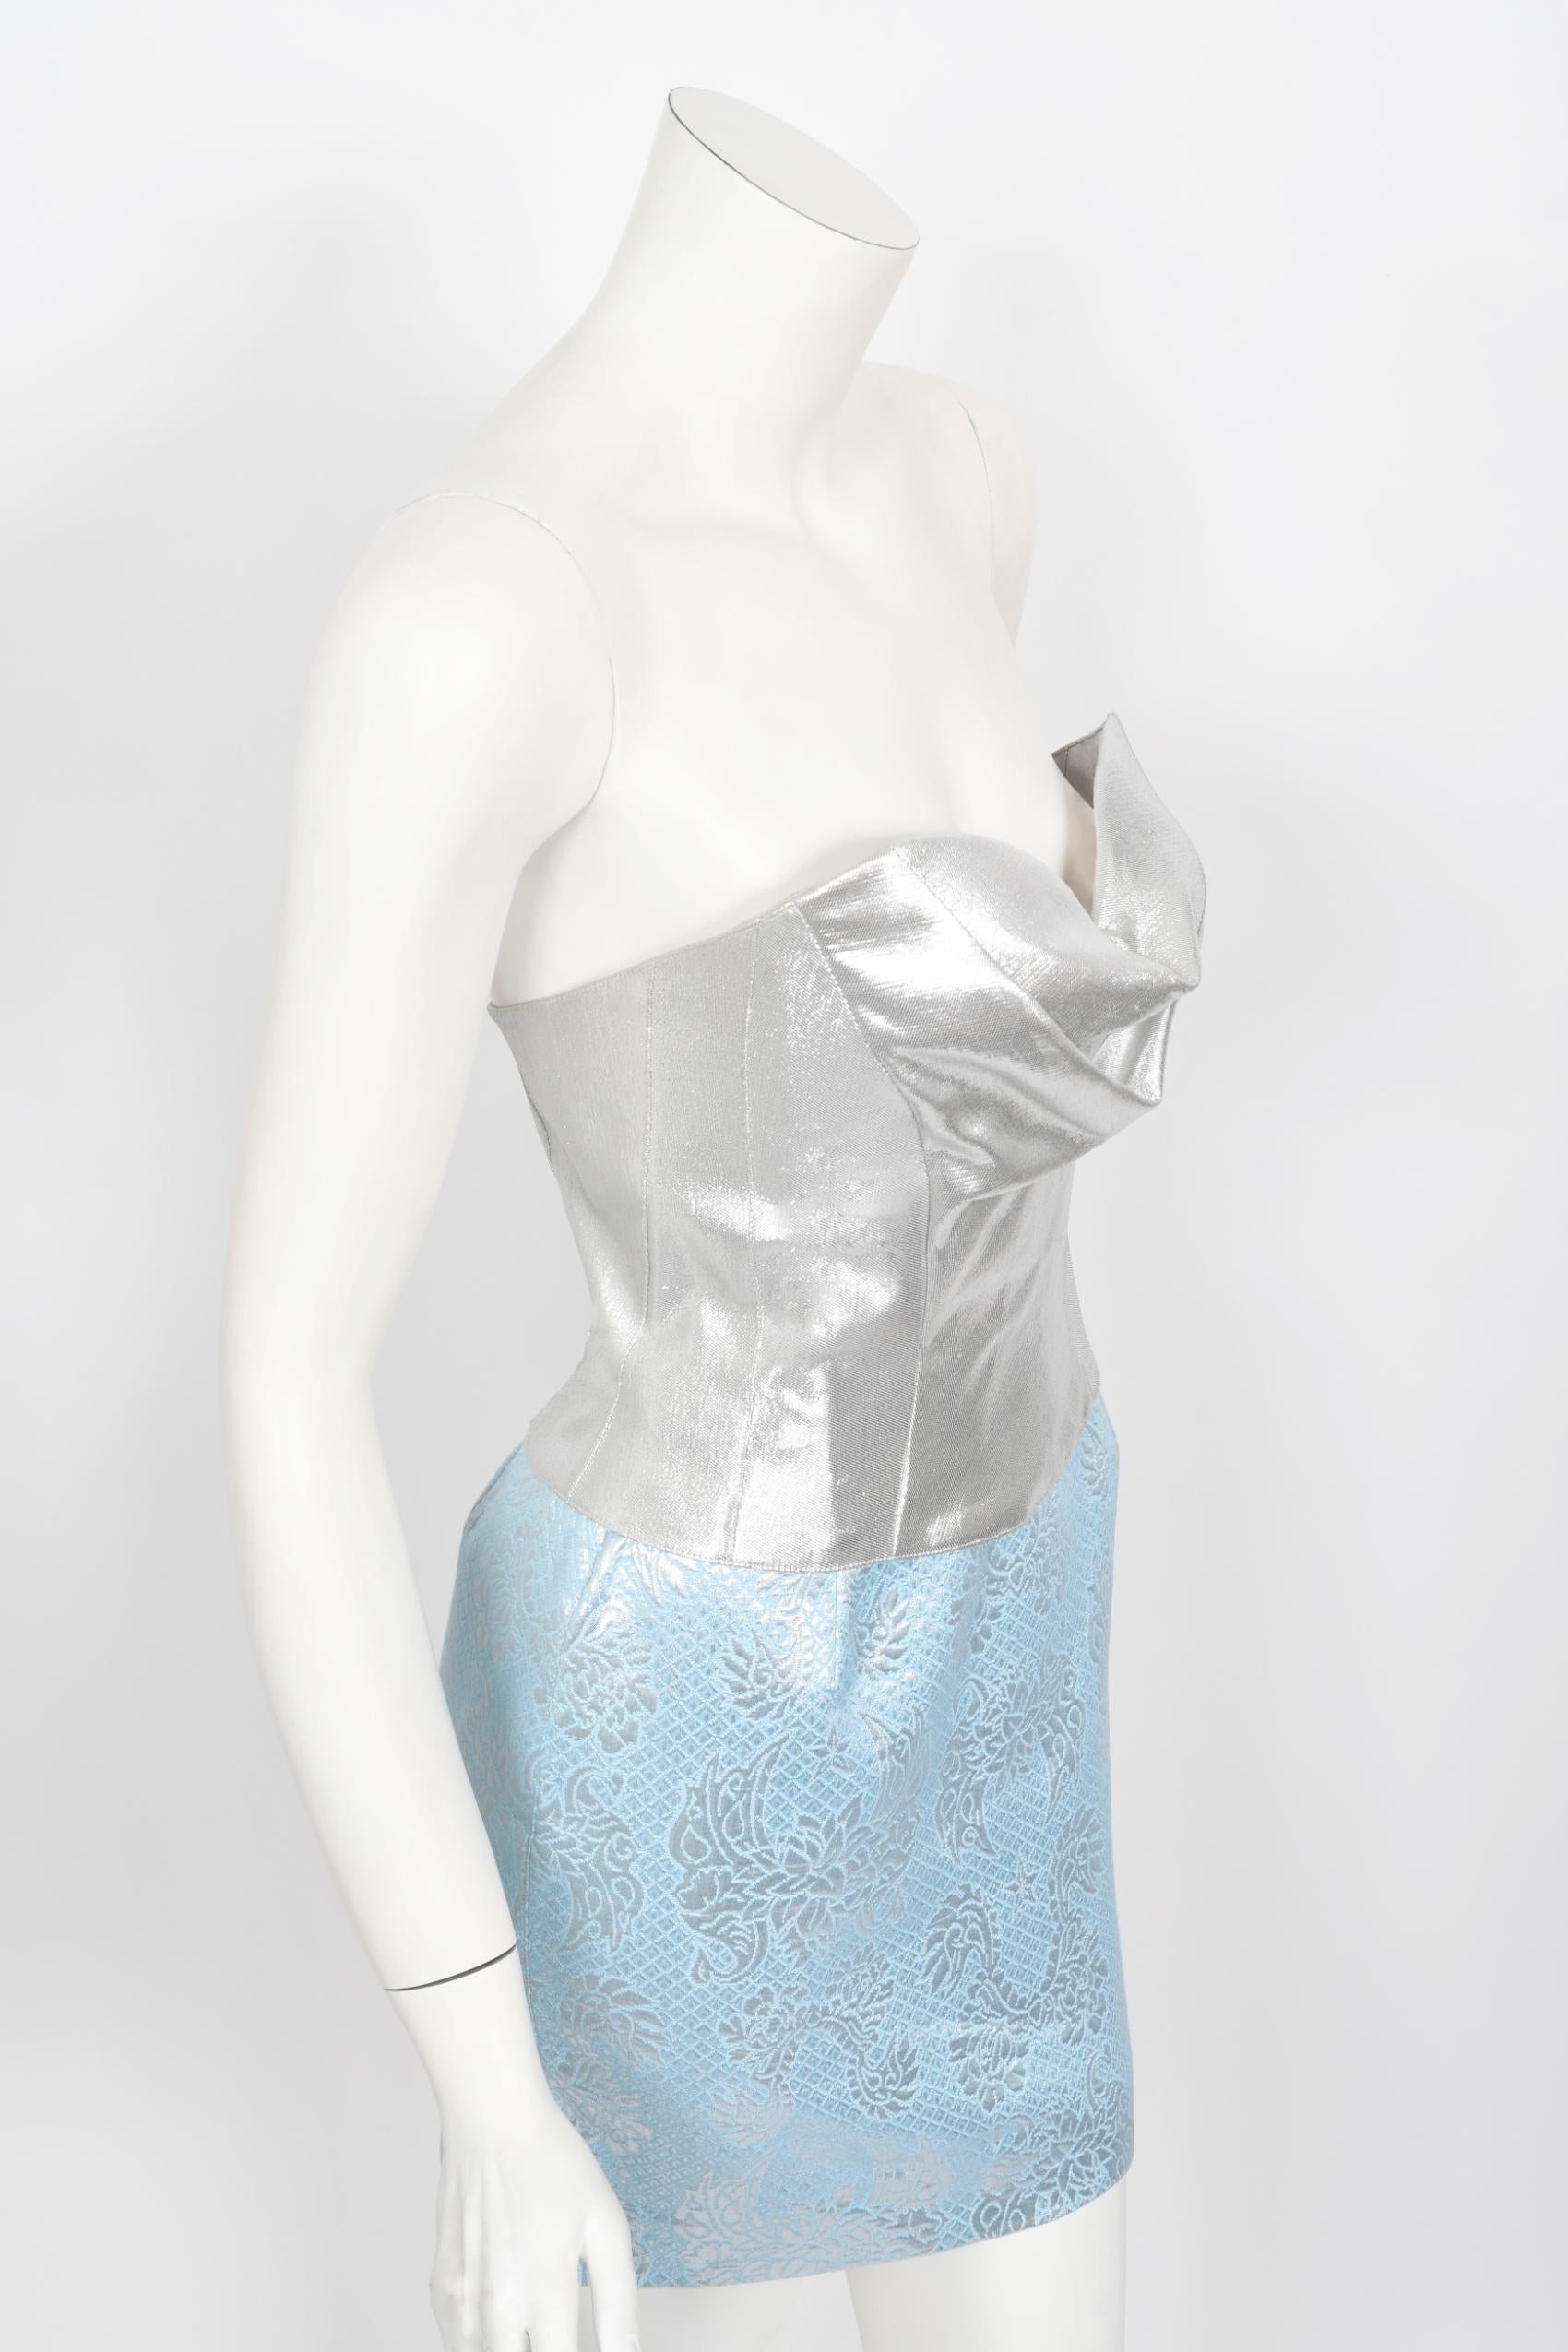 Iconic 1992 Thierry Mugler Couture Metallic Silver Blue Bustier Mini Skirt Suit For Sale 9